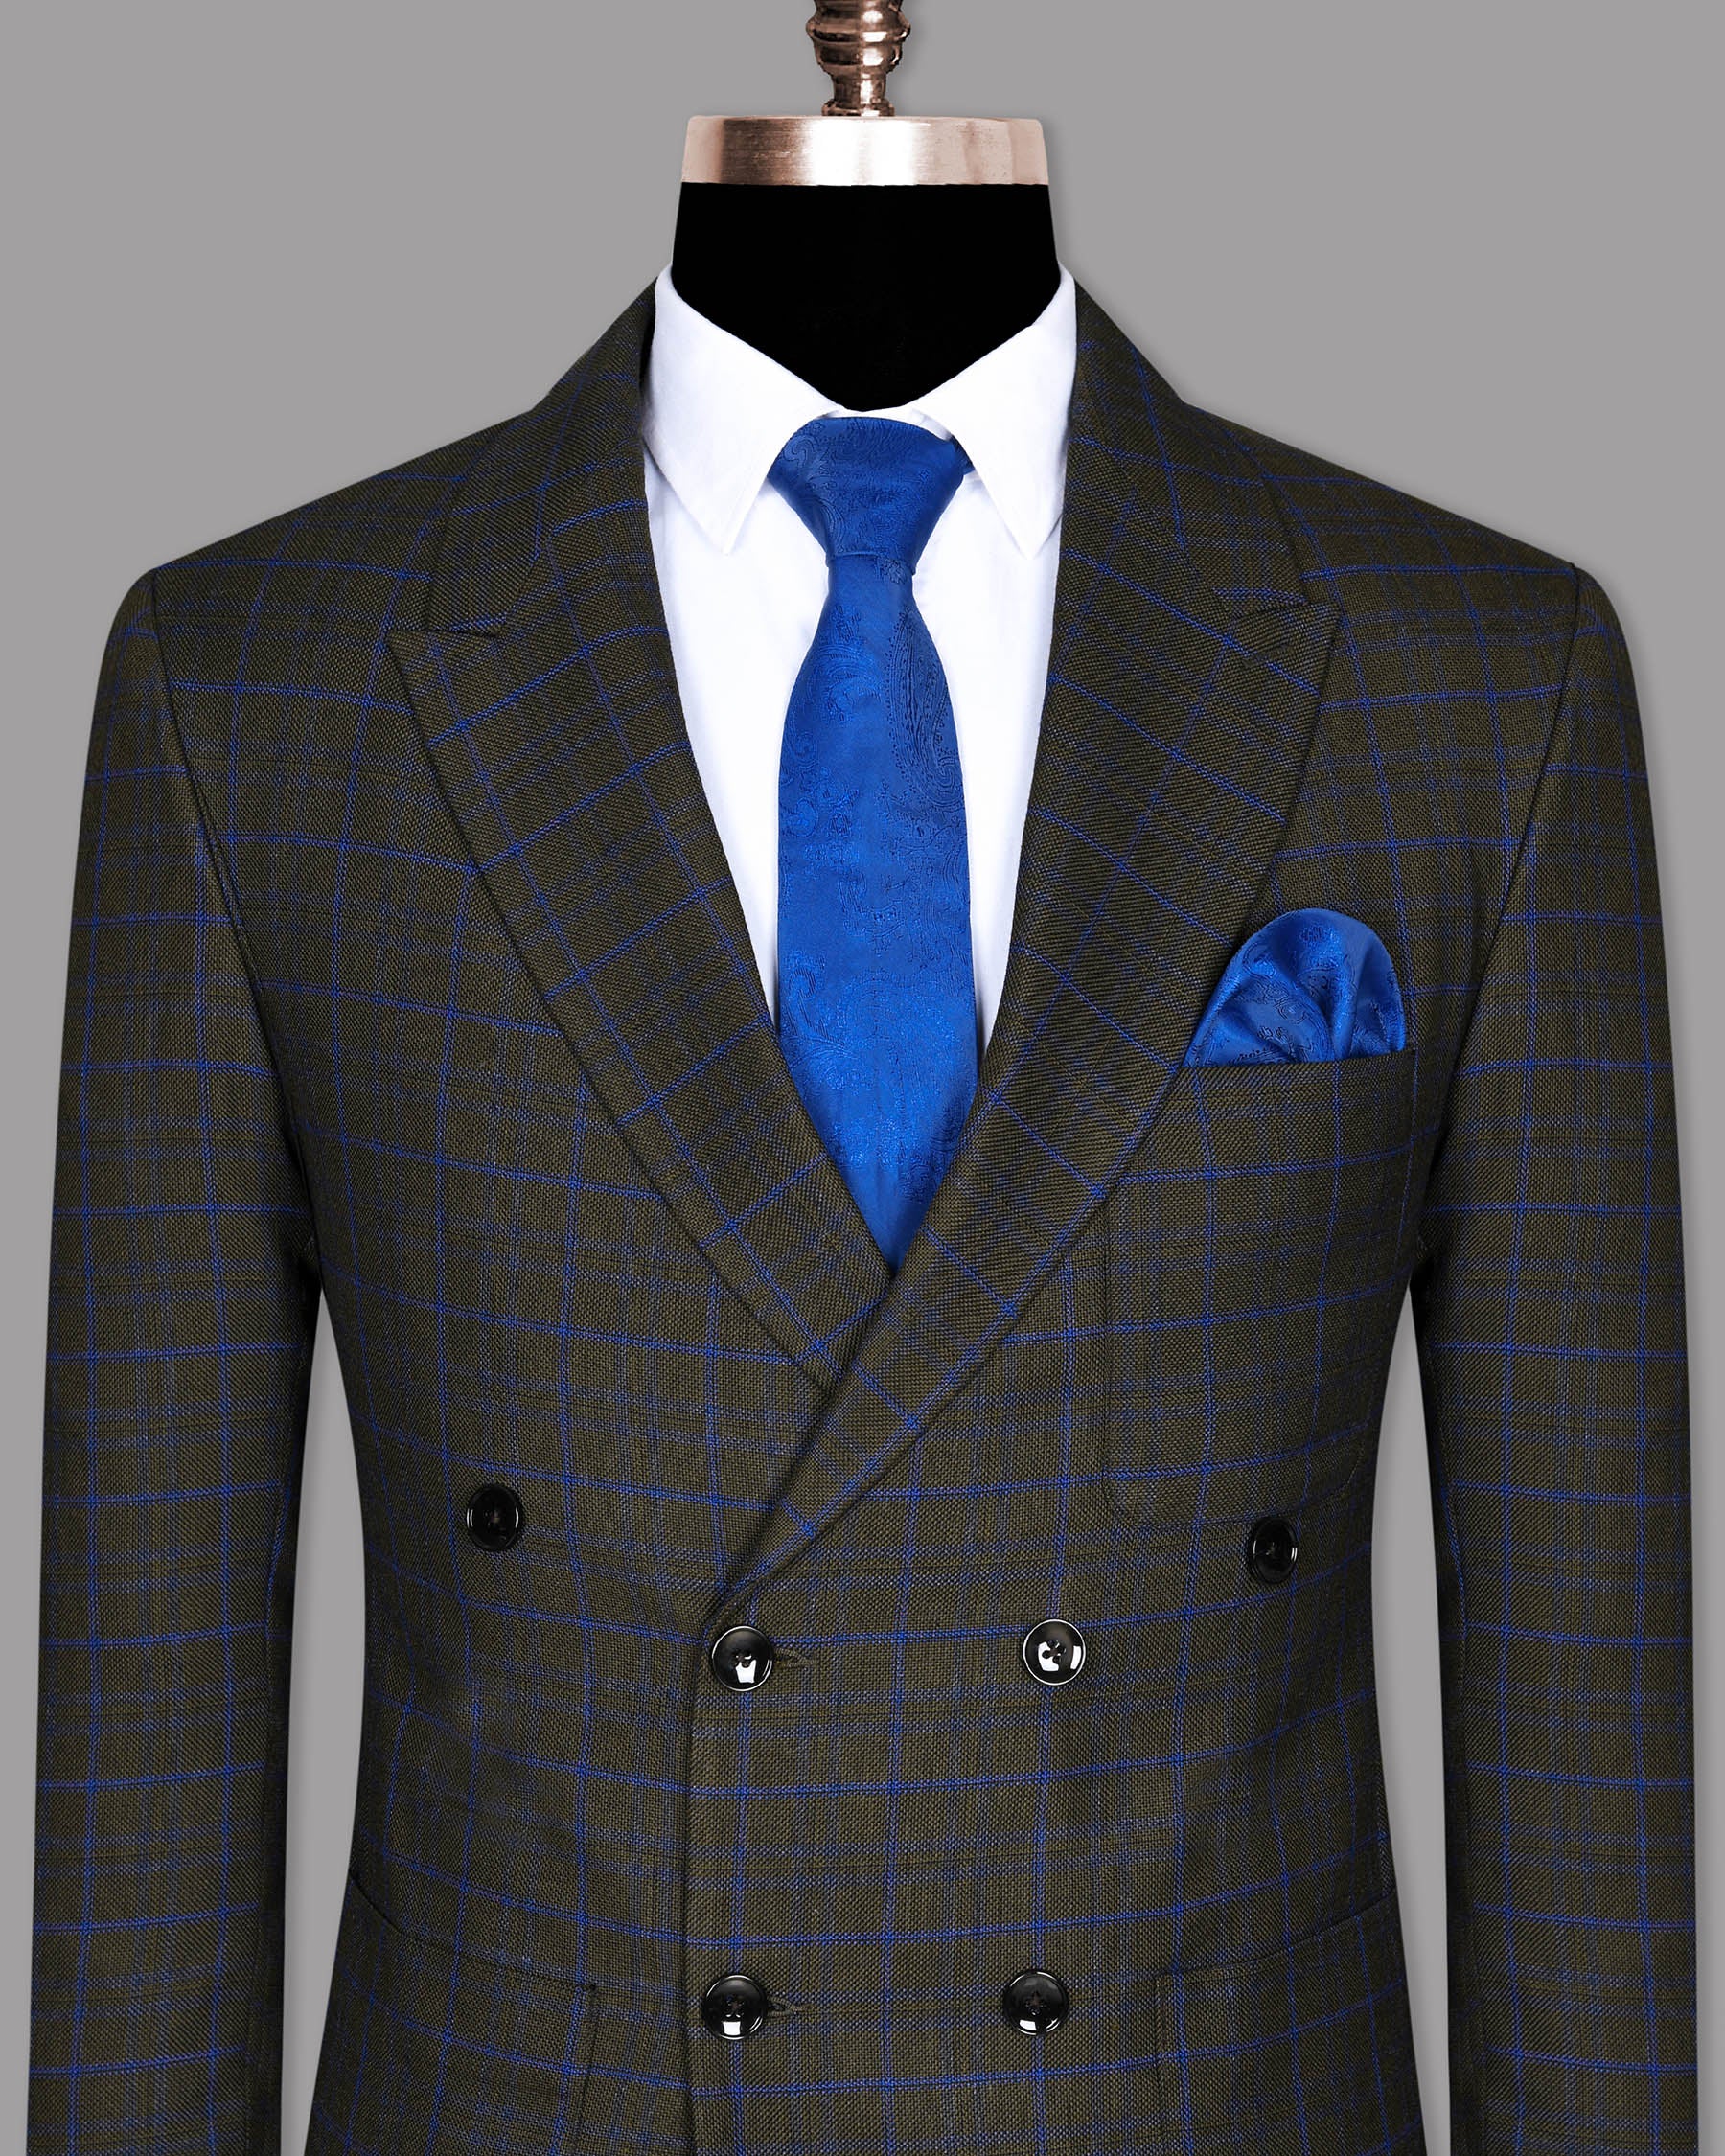 Wood Brown with Royal Blue windowpane Wool Double Breasted Tweed Blazer BL690DB-PP-44, BL690DB-PP-46, BL690DB-PP-48, BL690DB-PP-36, BL690DB-PP-38, BL690DB-PP-40, BL690DB-PP-42, BL690DB-PP-52, BL690DB-PP-54, BL690DB-PP-56, BL690DB-PP-58, BL690DB-PP-50, BL690DB-PP-60